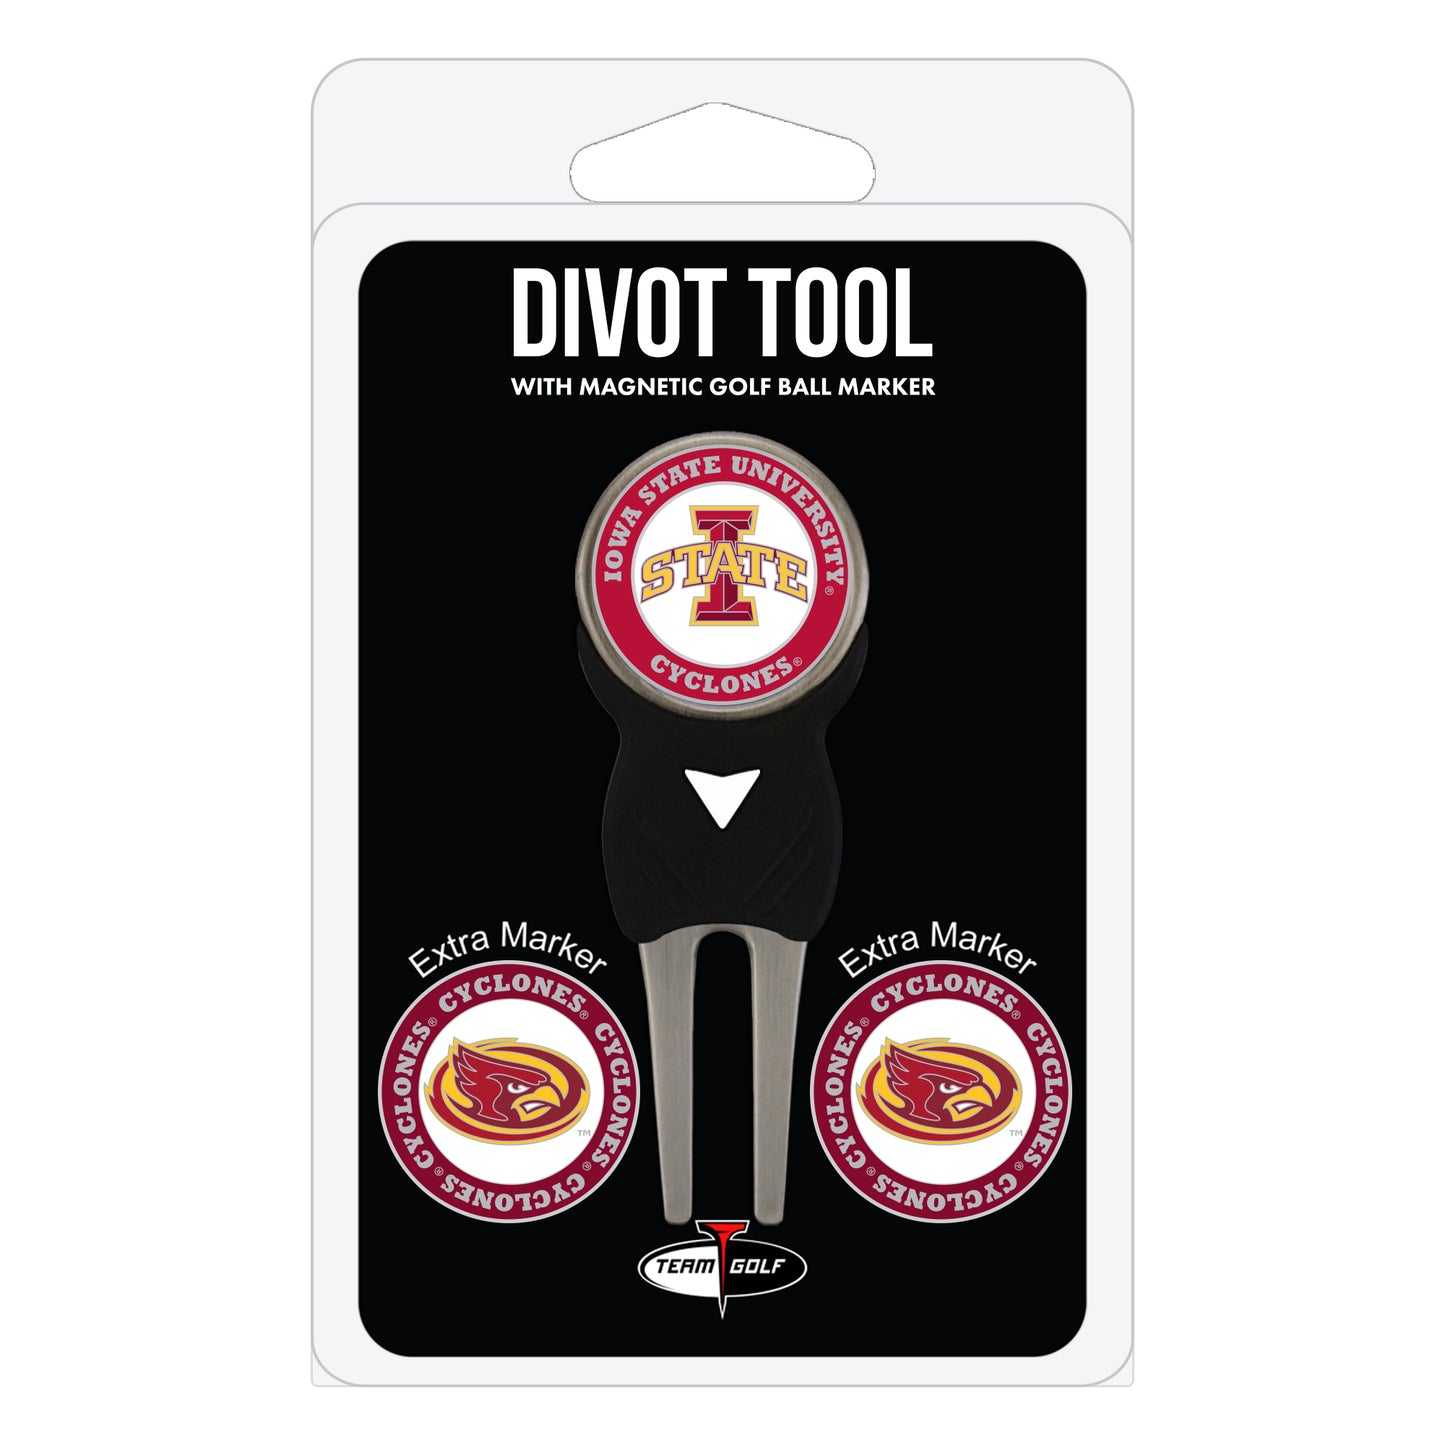 NCAA personalized golf divot tool - lowa state cyclones